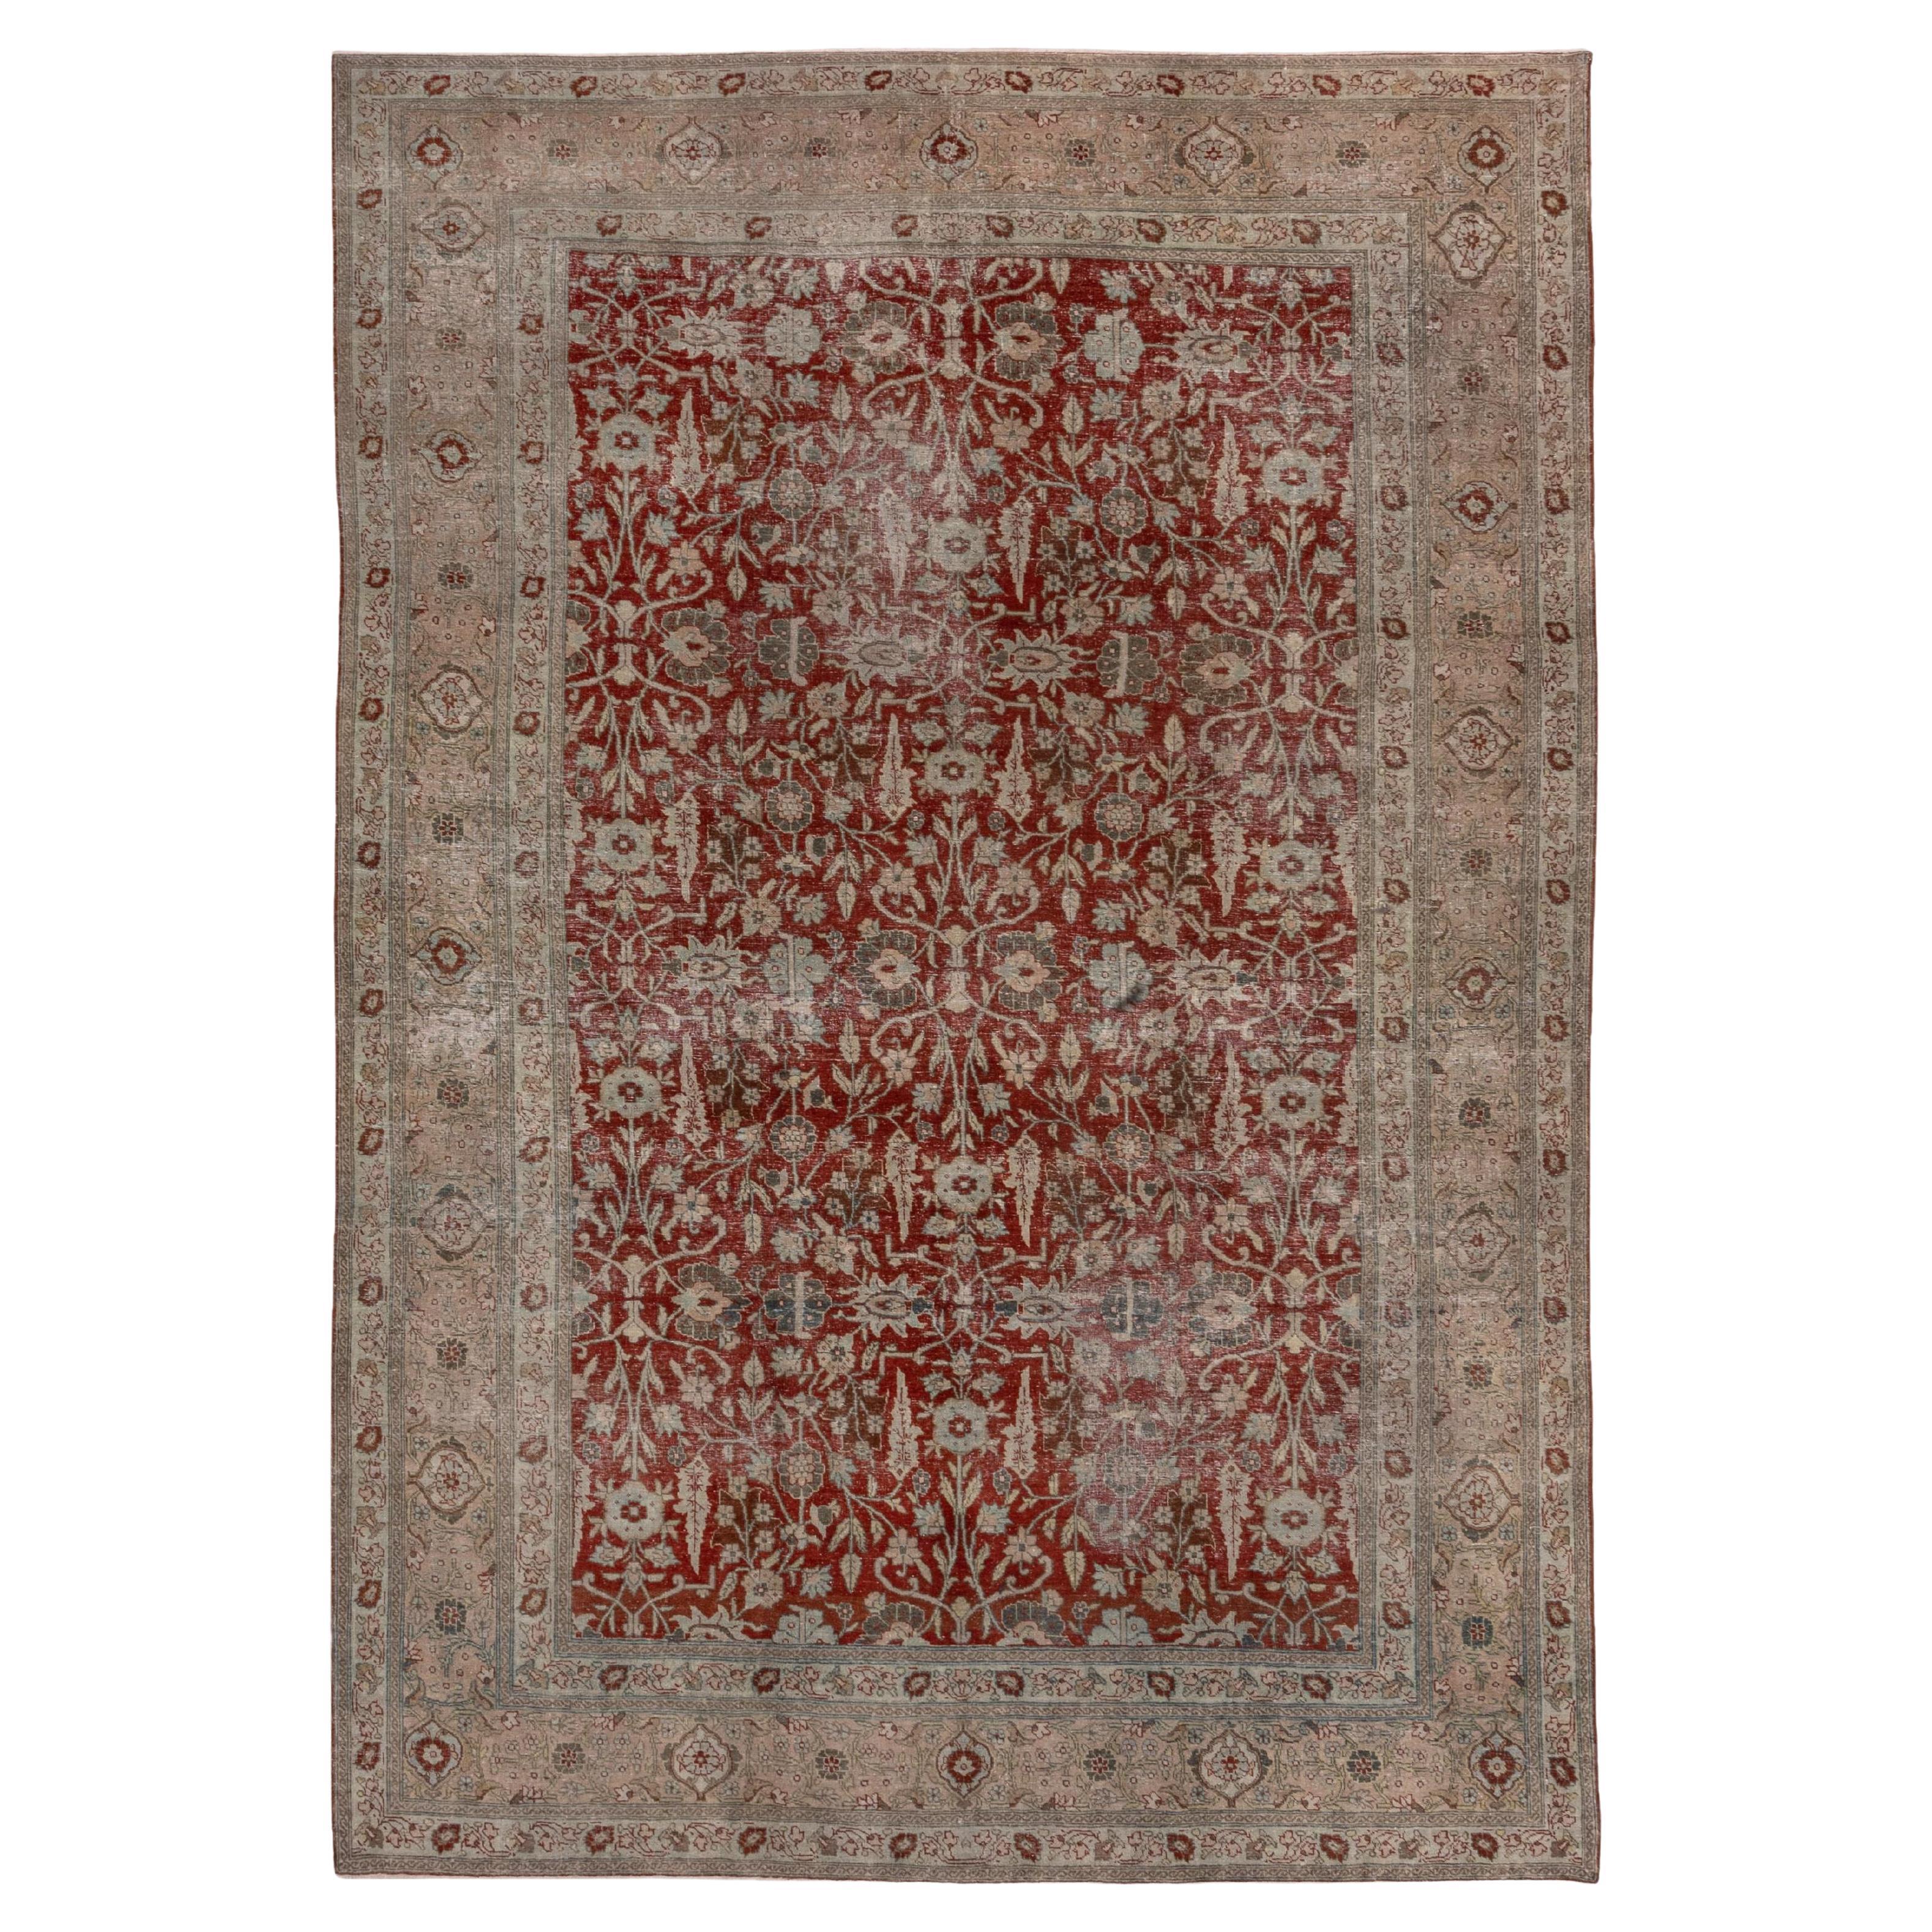 Beautiful Antique Persian Tabriz Rug, Ruby Red Floral Field, Soft Toned Borders For Sale